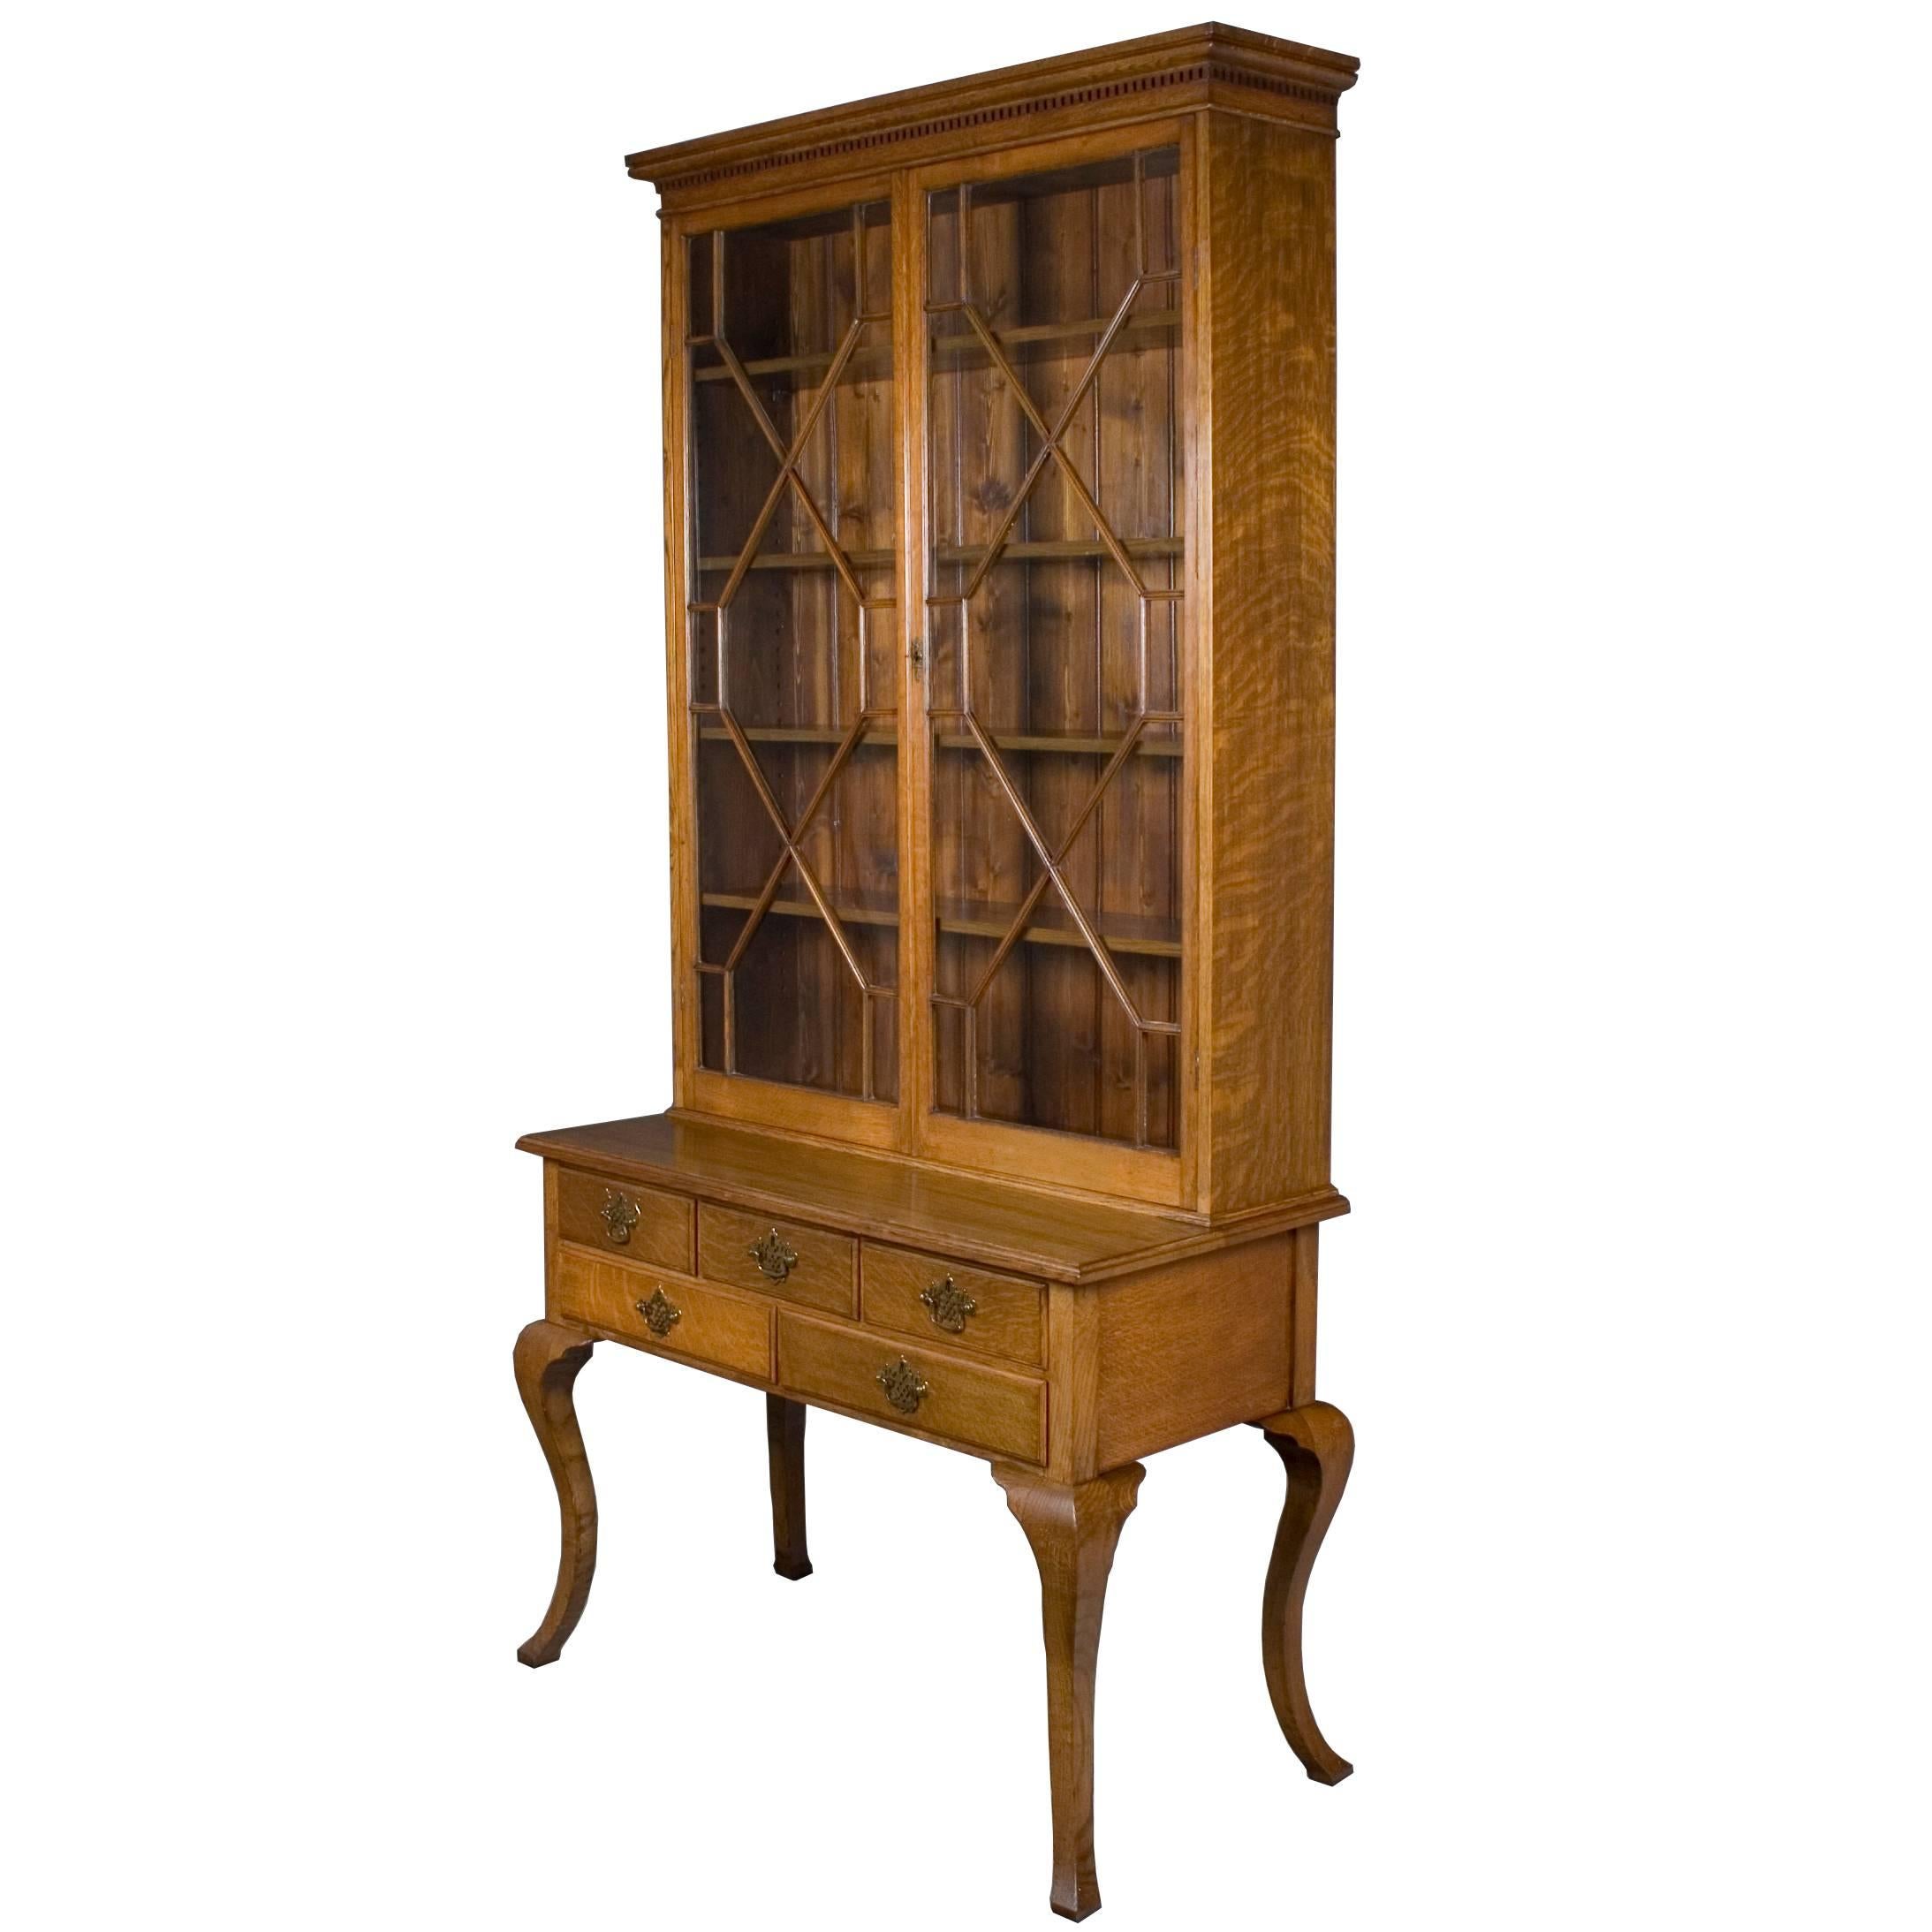 Oak Cabriole Leg Tall Glass Door Bookcase with Drawers